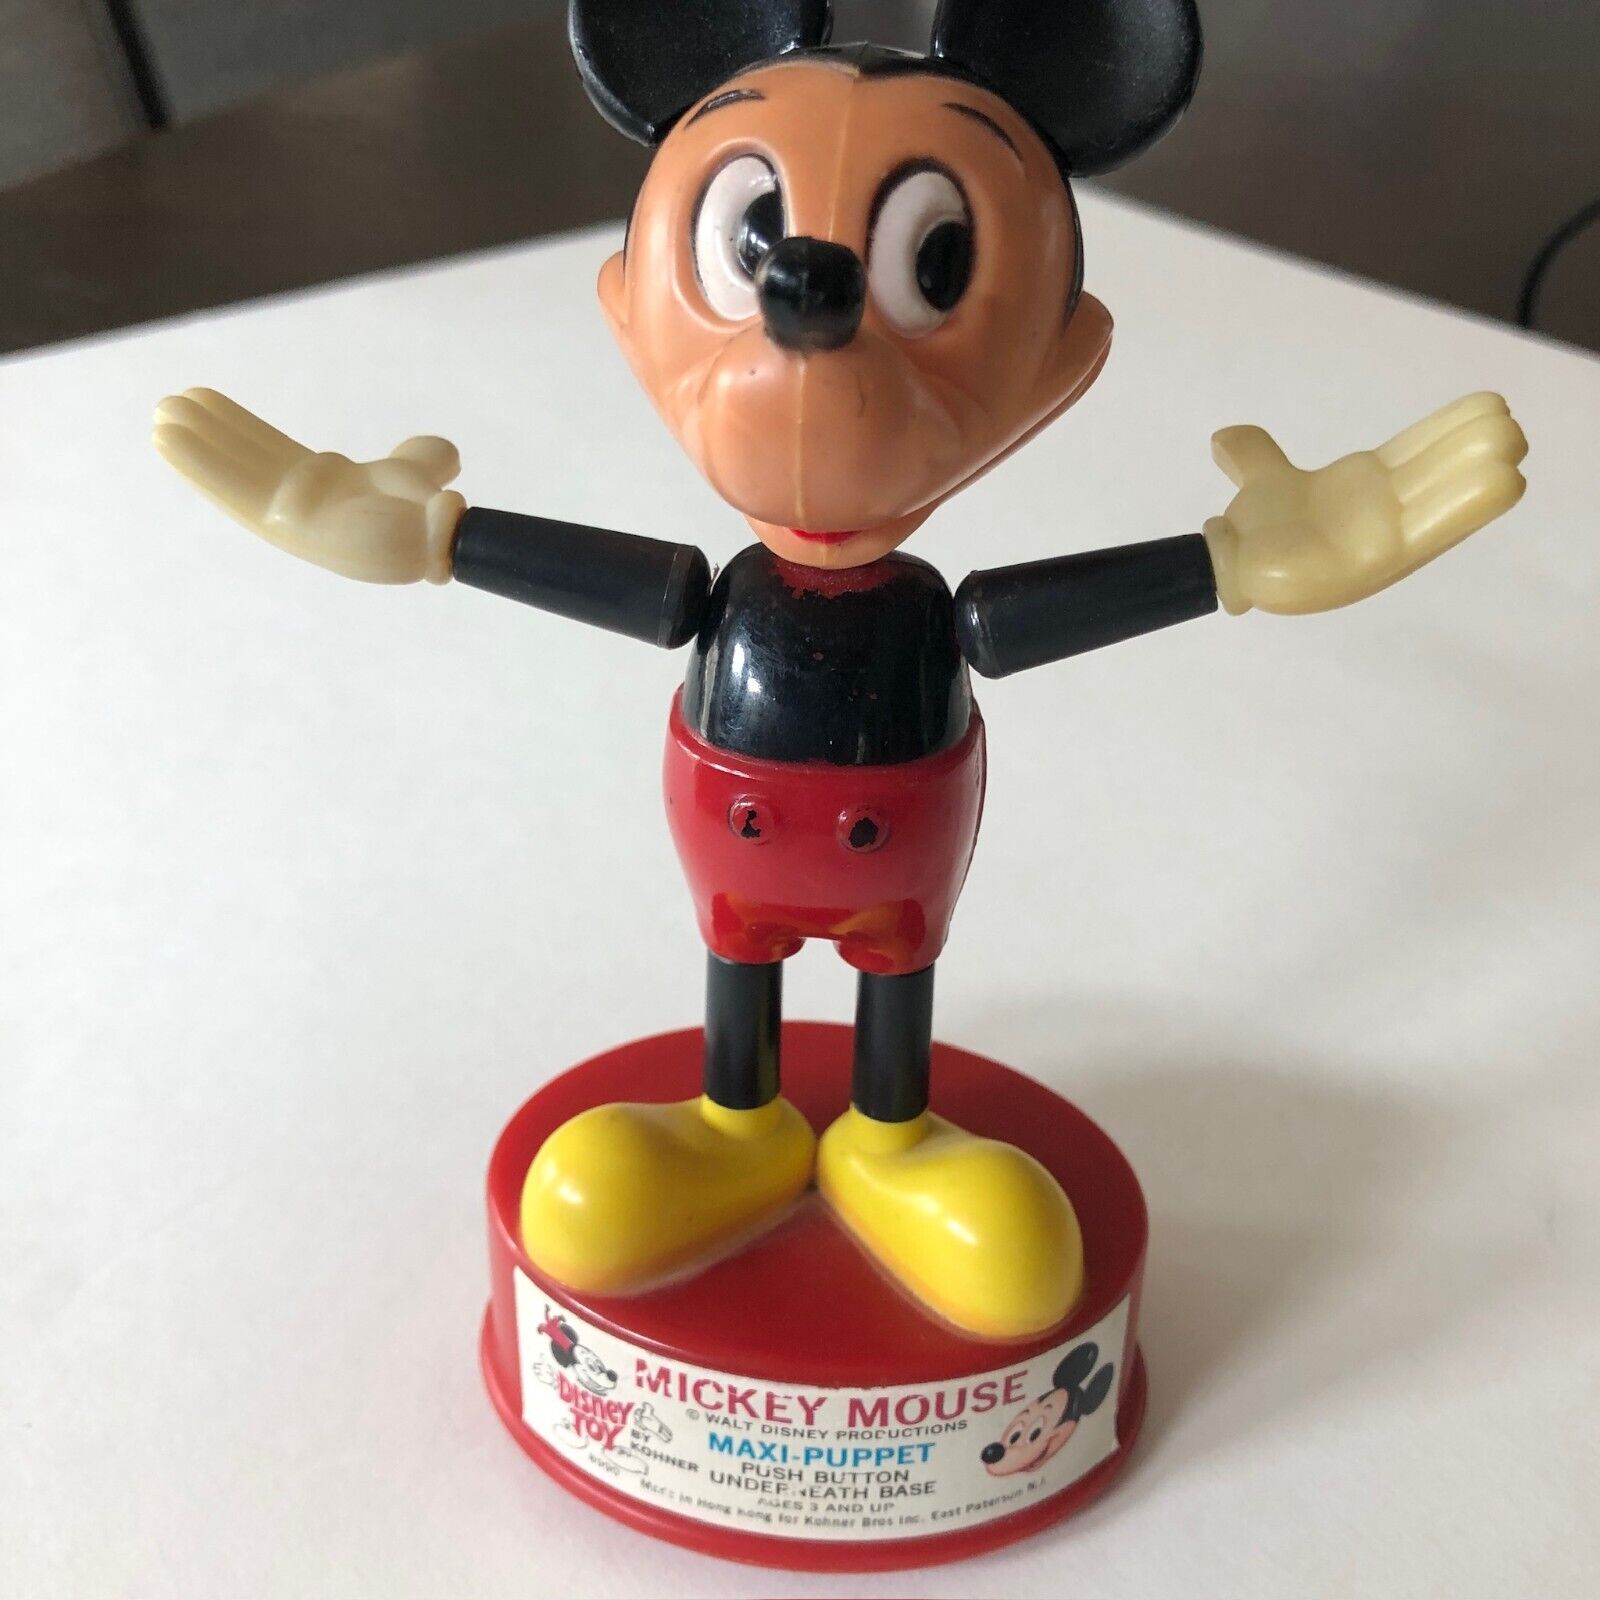 Vintage Mickey Mouse Disney 1970s Kohner Brother Push Button Maxi-Puppet Figure